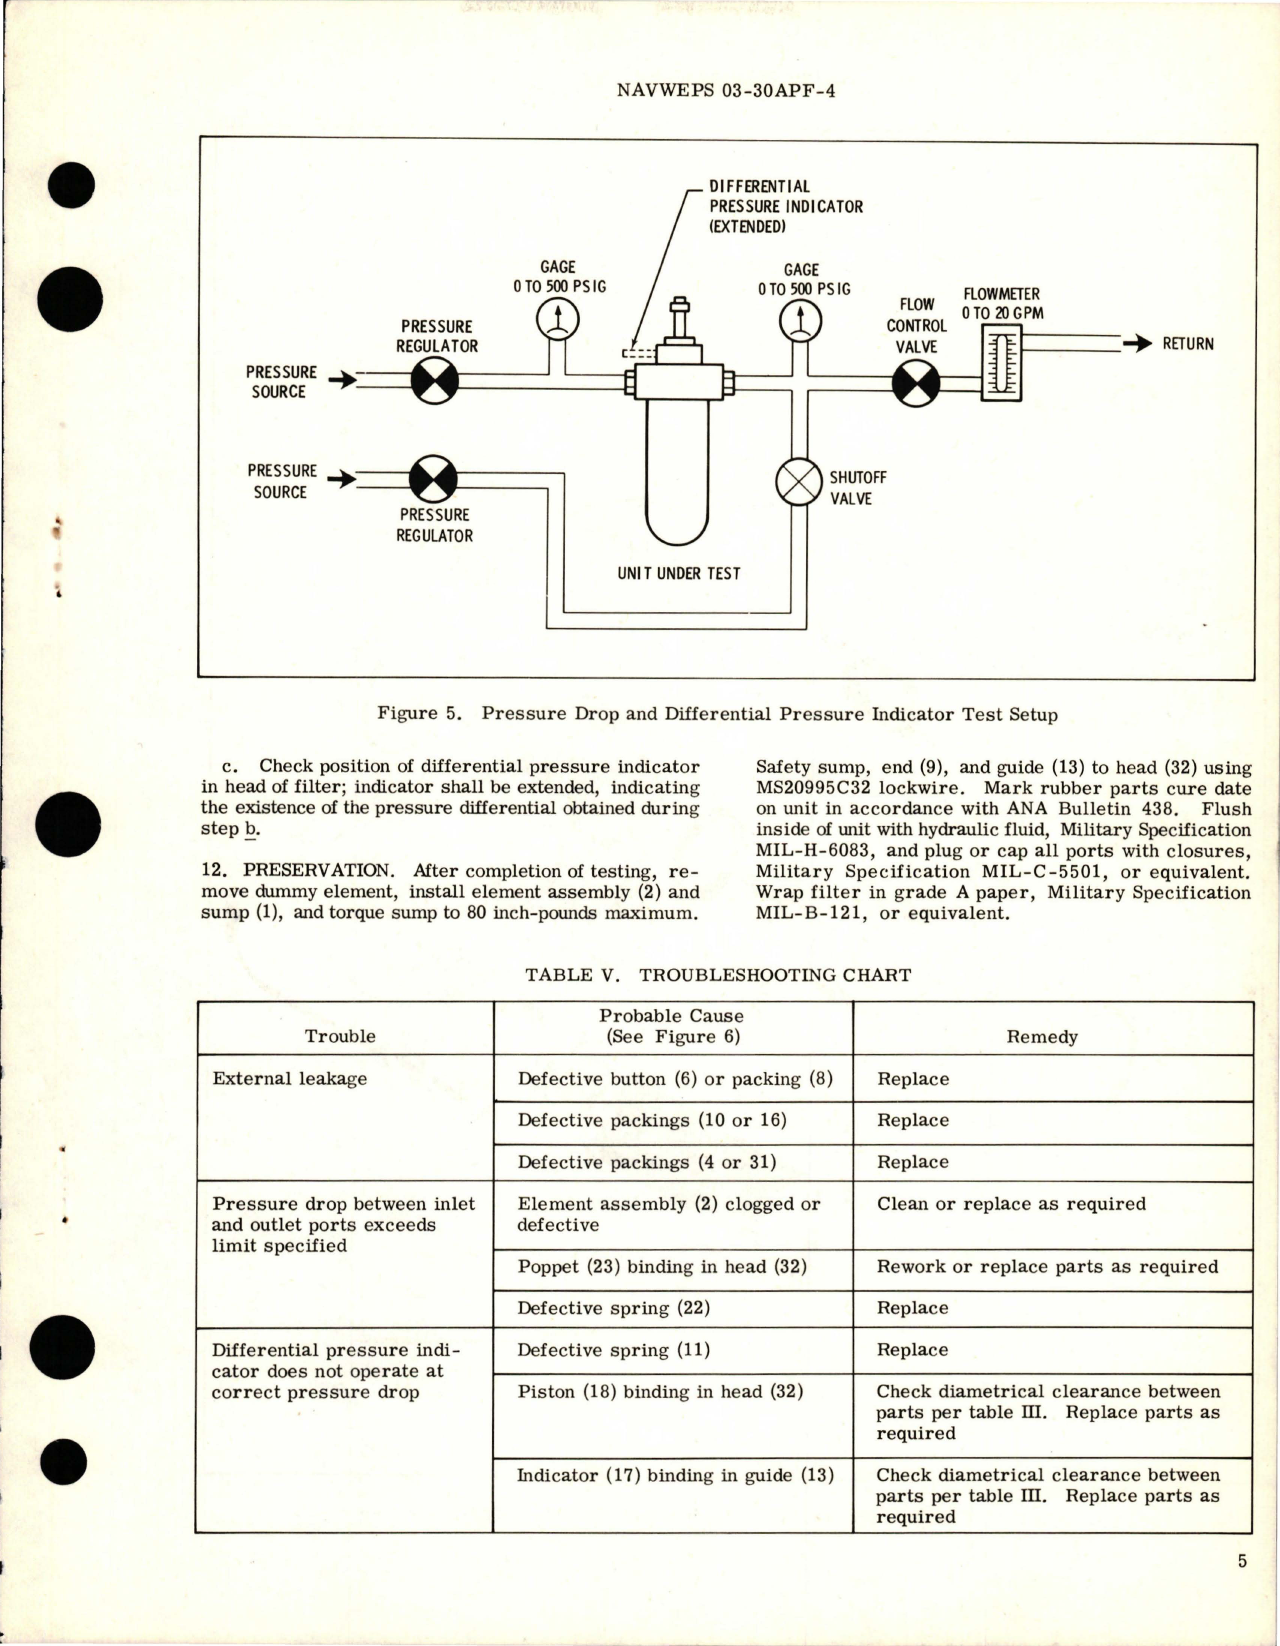 Sample page 5 from AirCorps Library document: Overhaul Instructions with Parts Breakdown for Hydraulic Filters - Parts 4903-1, 4903-2, 4903-3, 4903-4, 4903-3A, and 4903-4A 